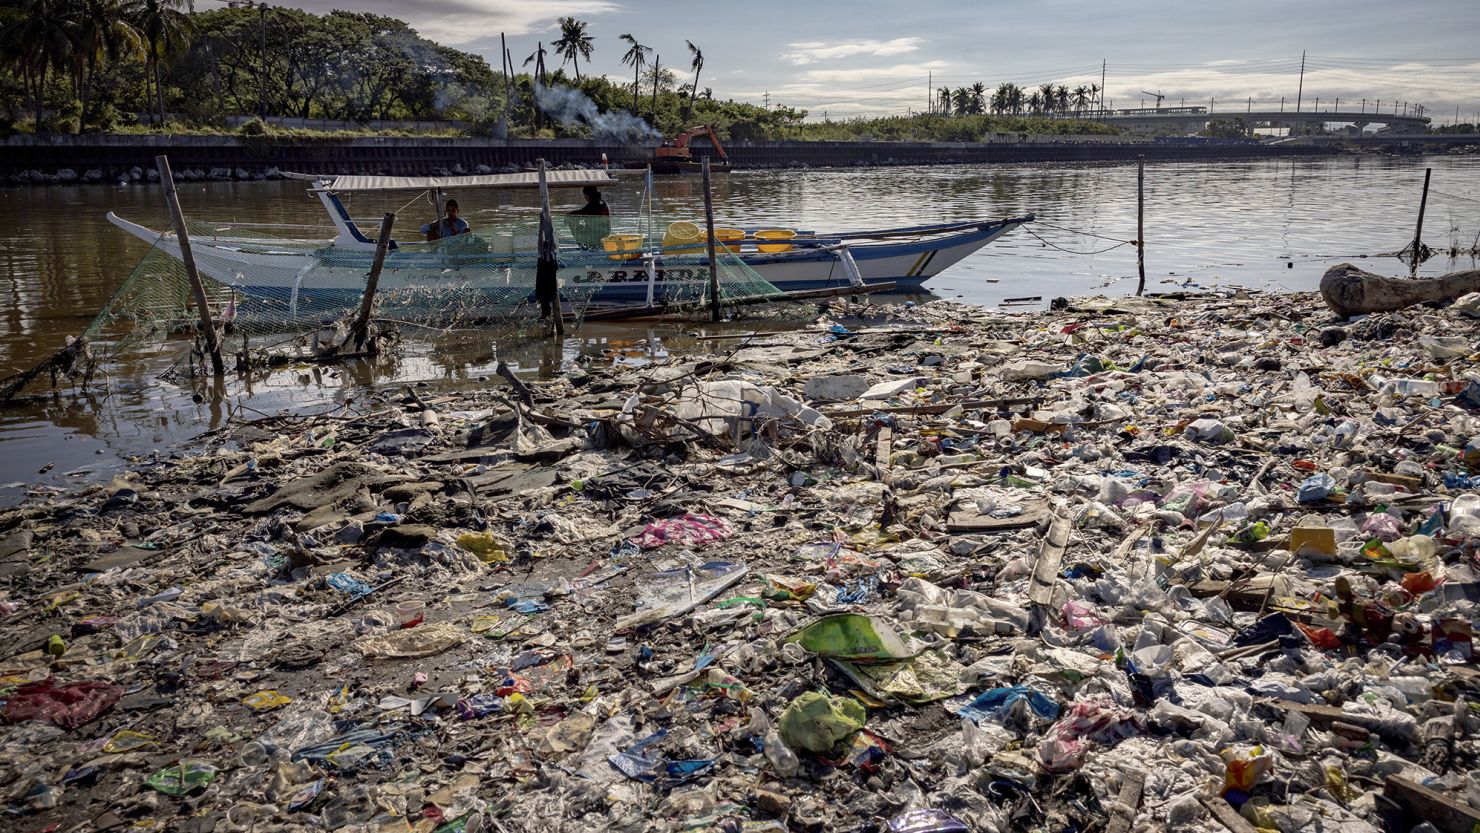 UN's new task: Save Africa from becoming world's plastic 'dustbin